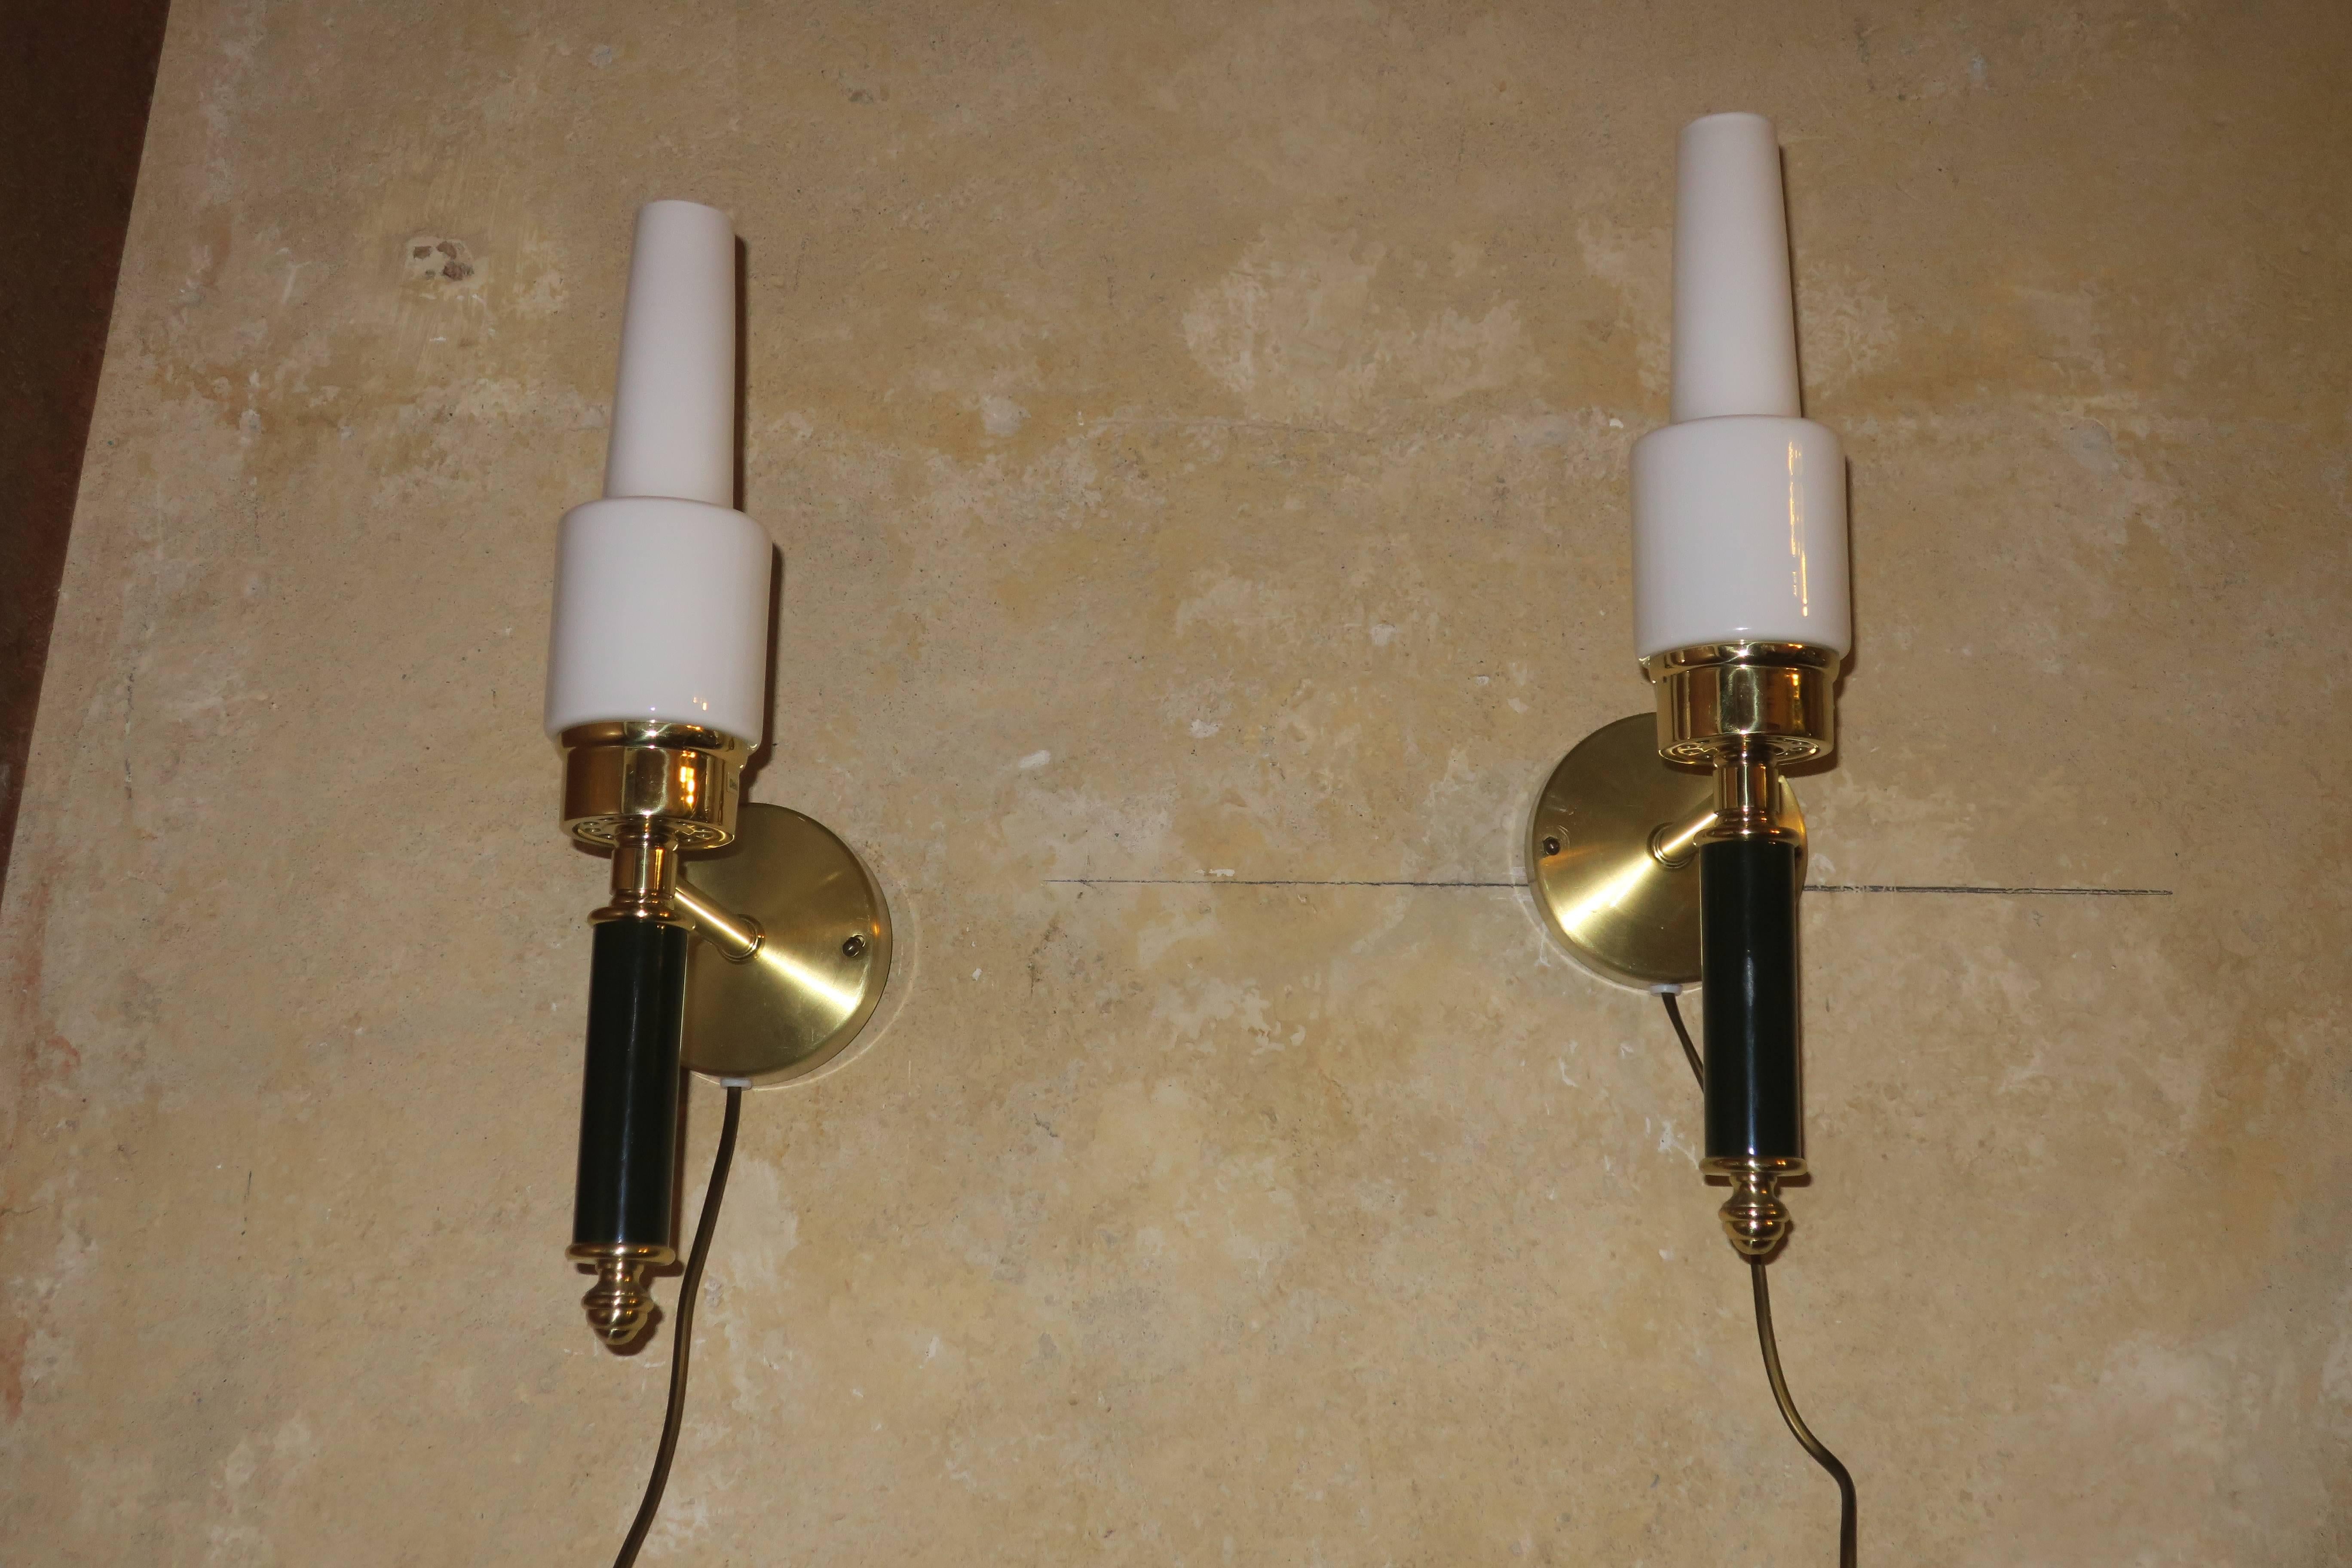 Pair of Swedish C E Fors for EWA Värnamo brass and glass sconces in very good condition.
If sold to the US or Canada will be supplied with simple screw-in adapters for standard candelabra bulbs.